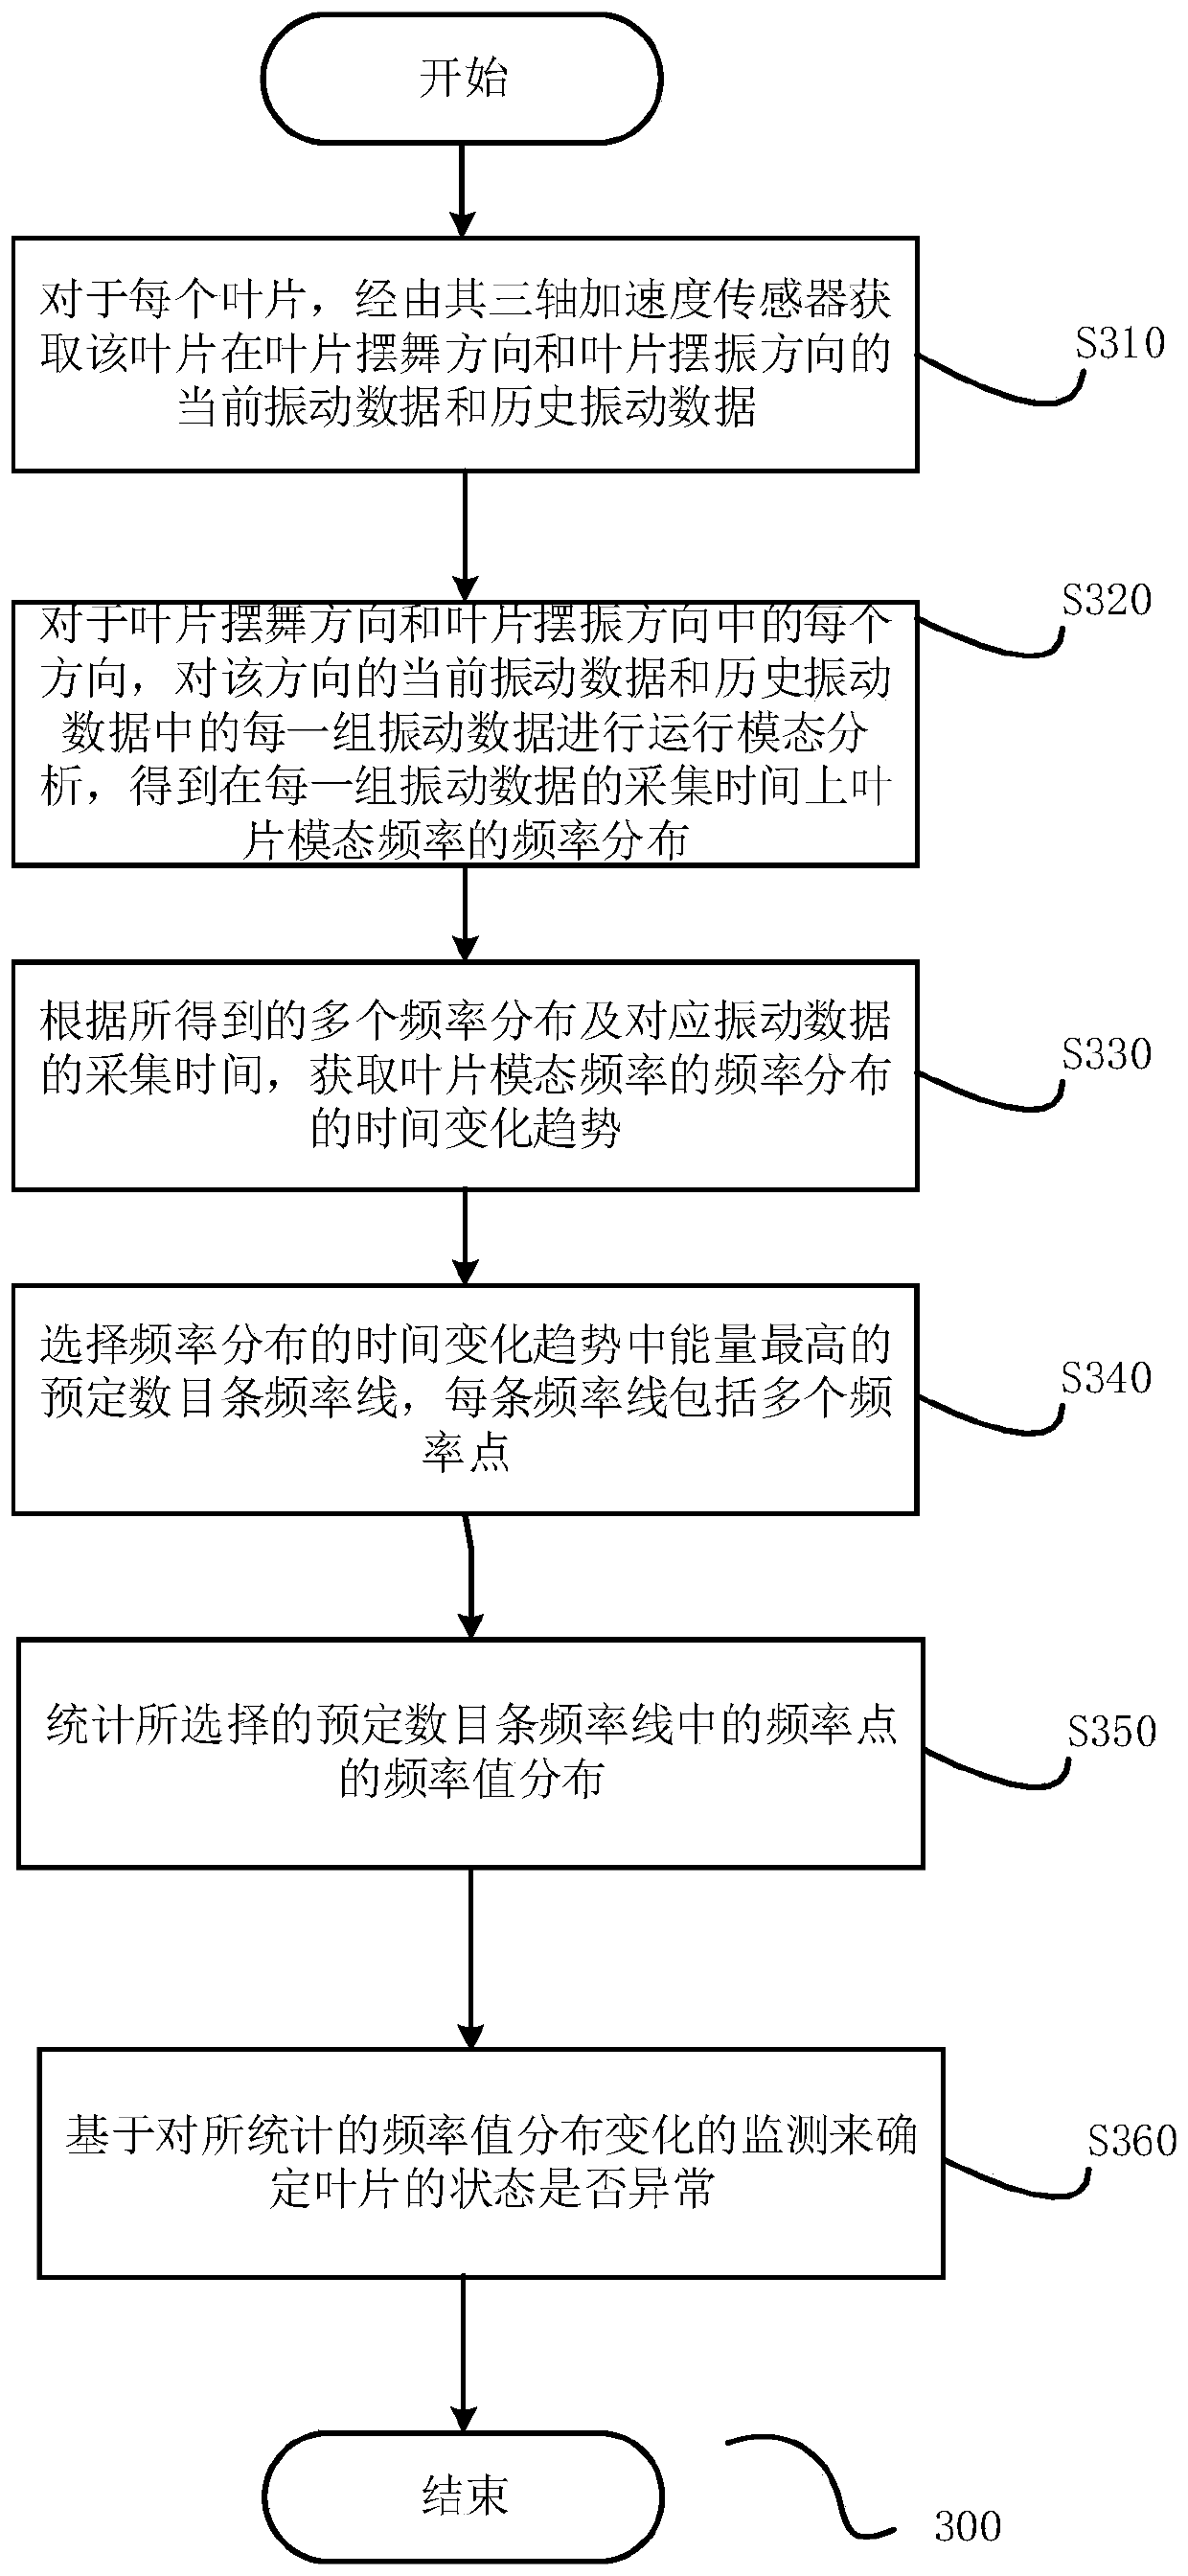 A method, computing device and system for monitoring the status of blades in a wind power plant